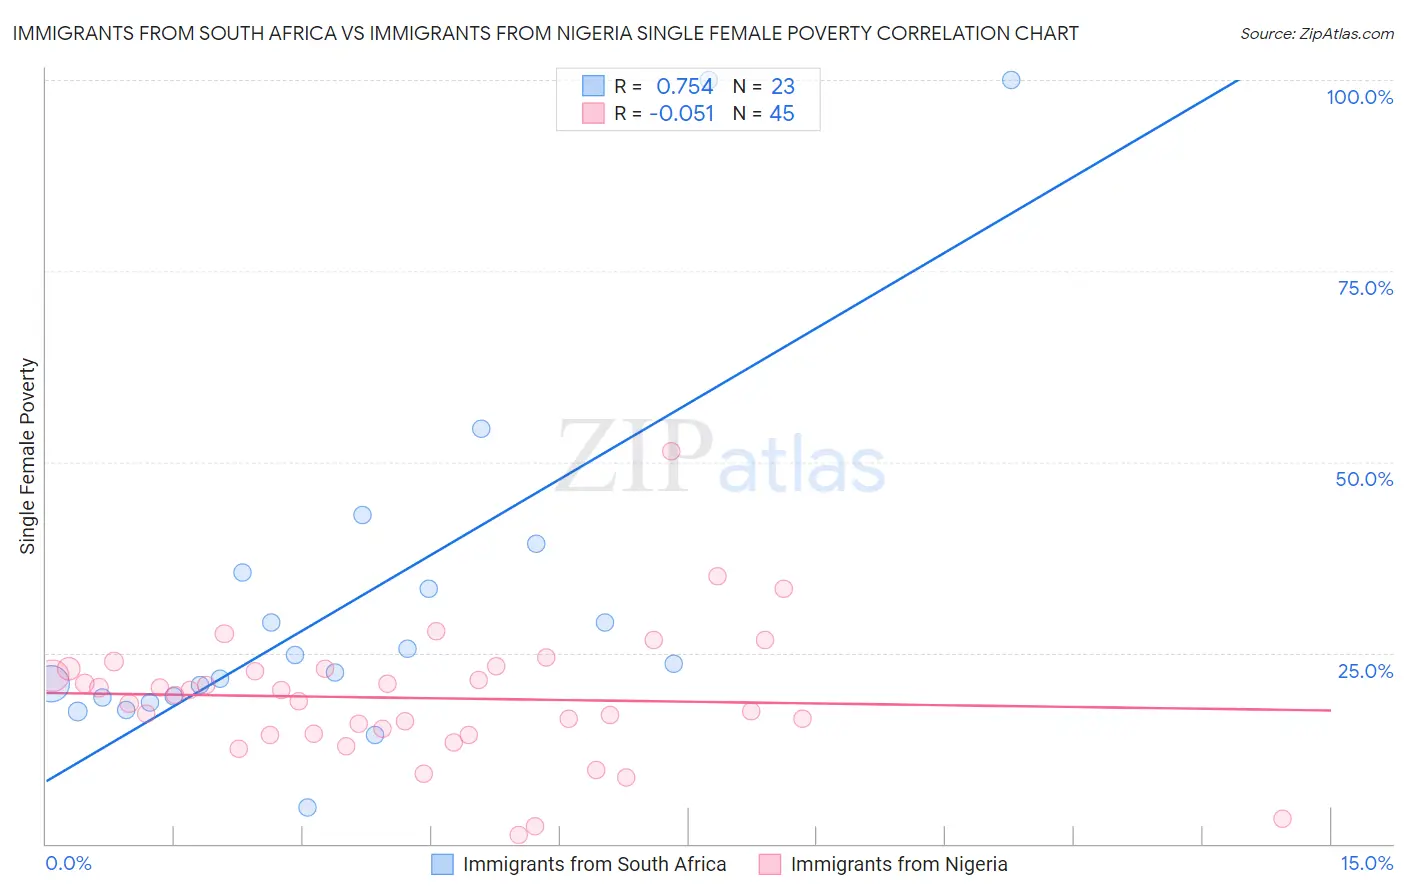 Immigrants from South Africa vs Immigrants from Nigeria Single Female Poverty